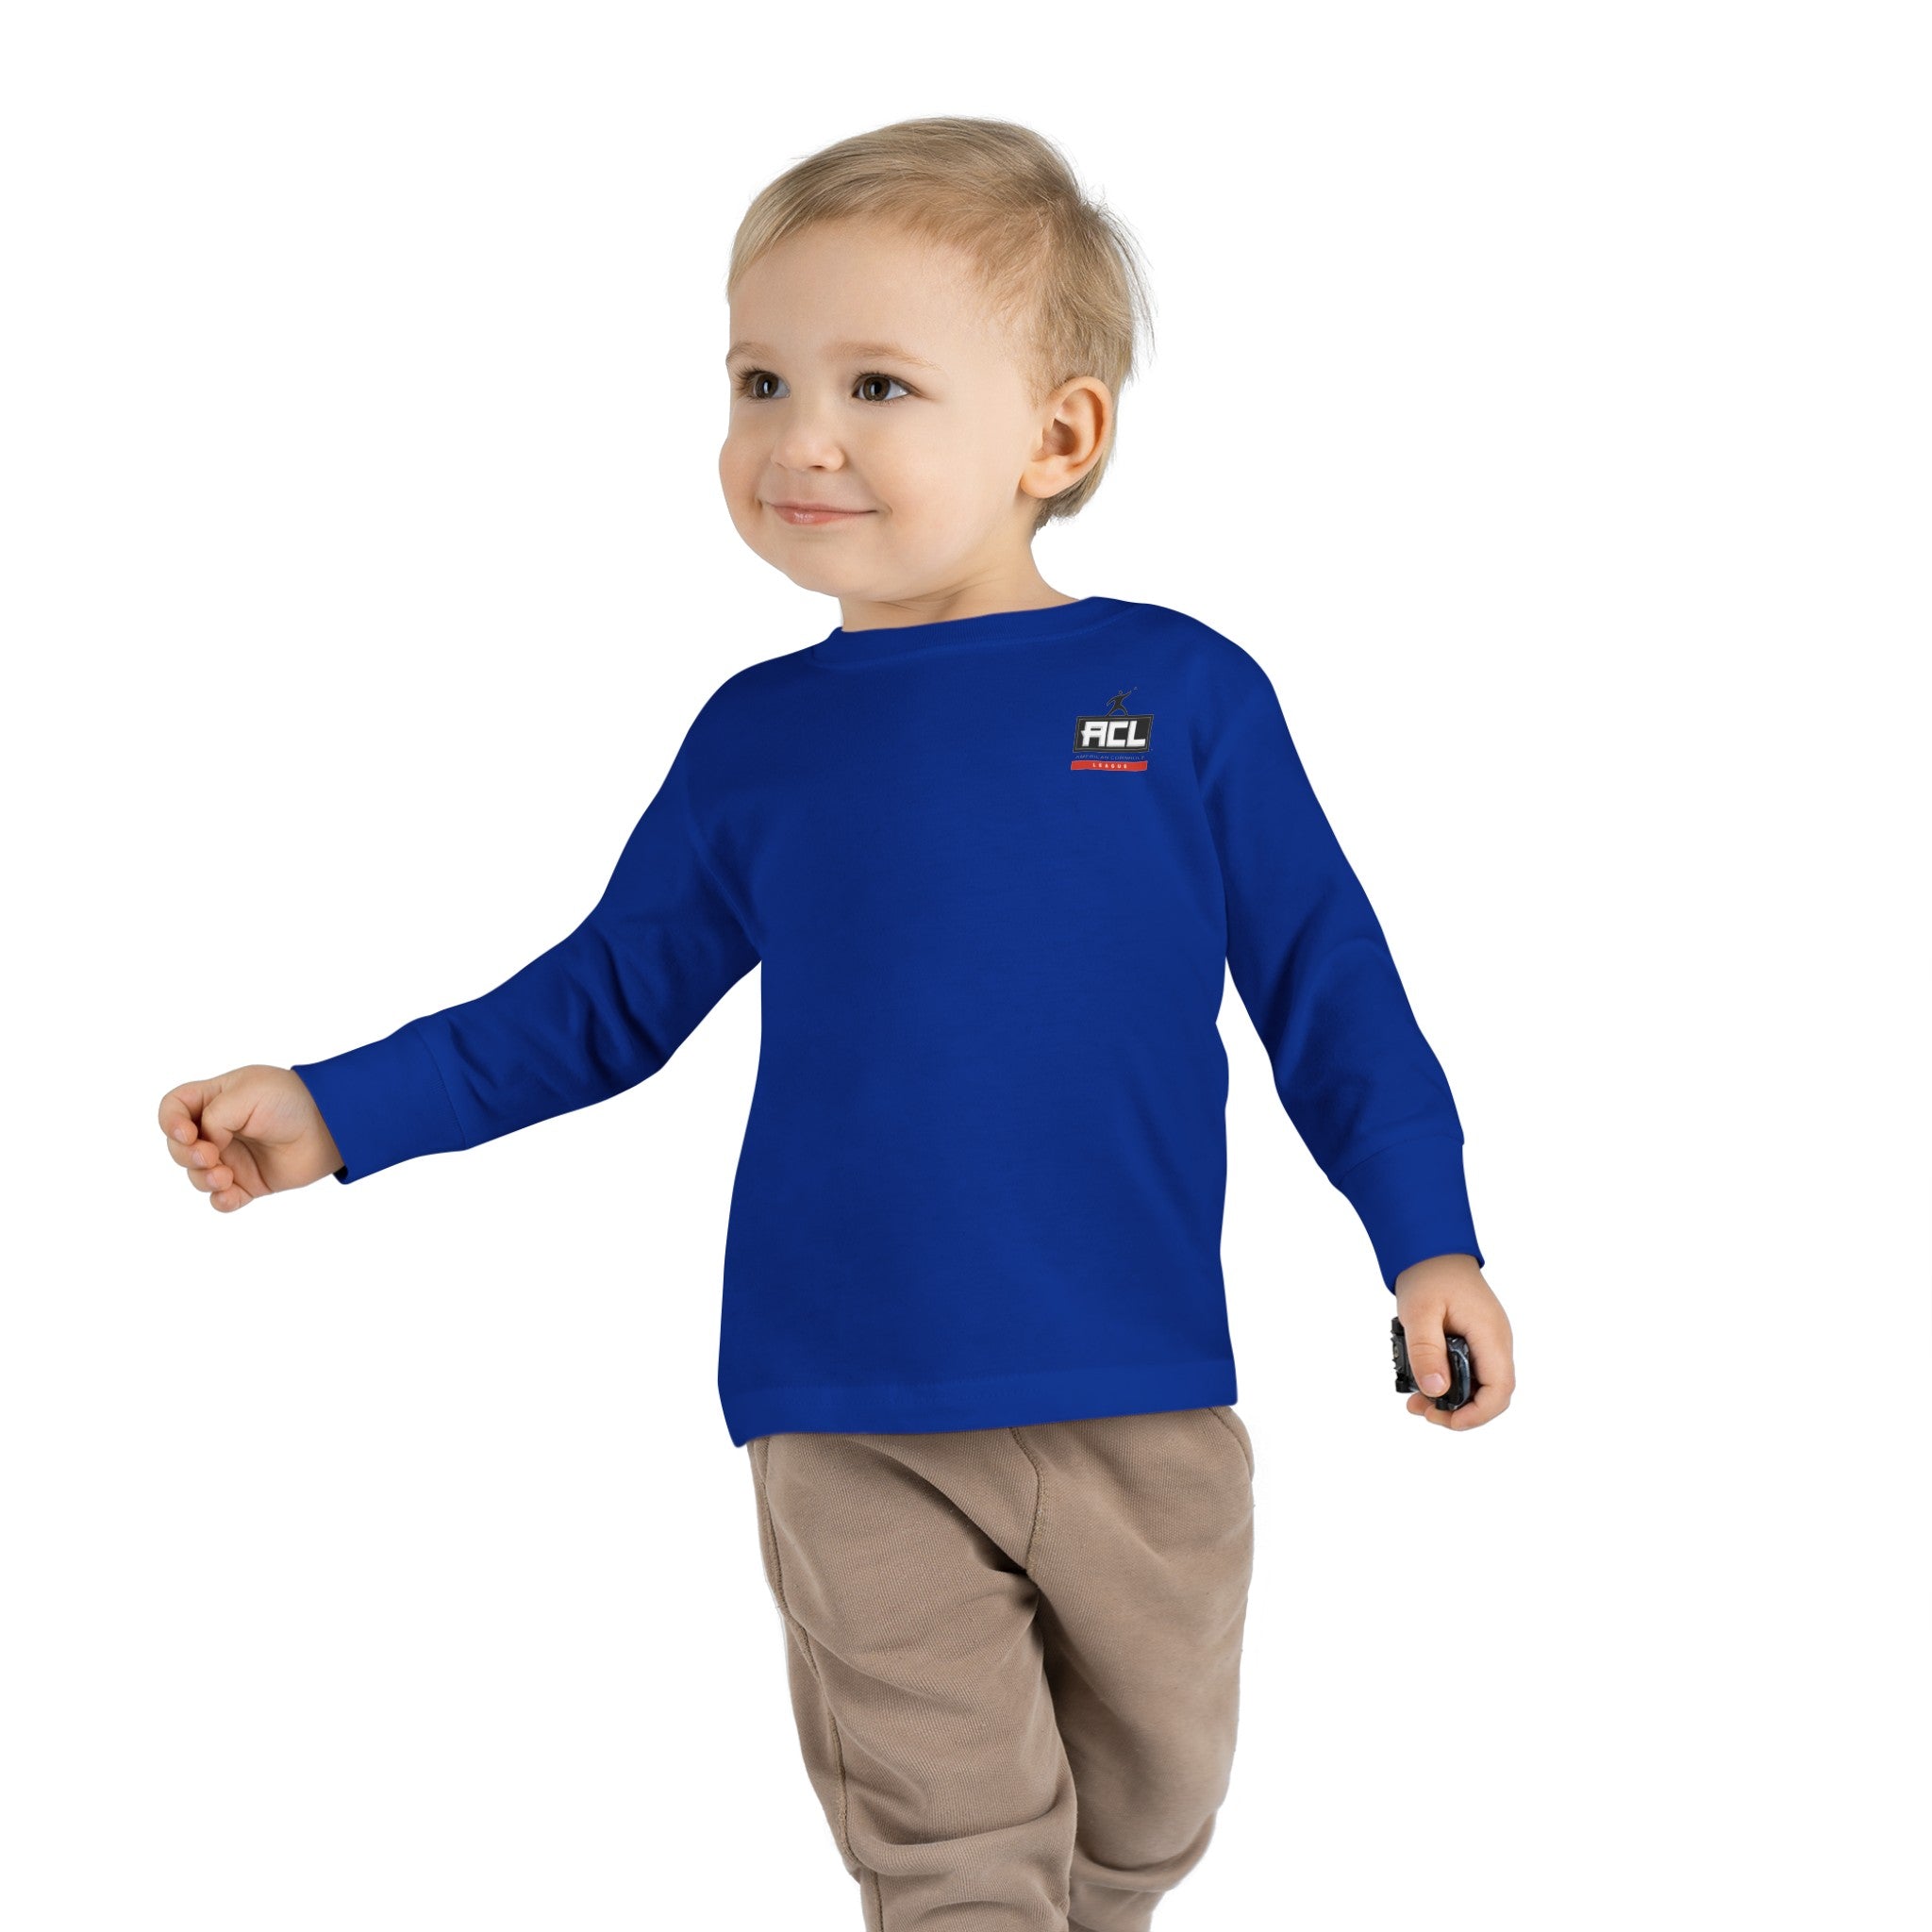 Let's Go - Toddler Long Sleeve Tee